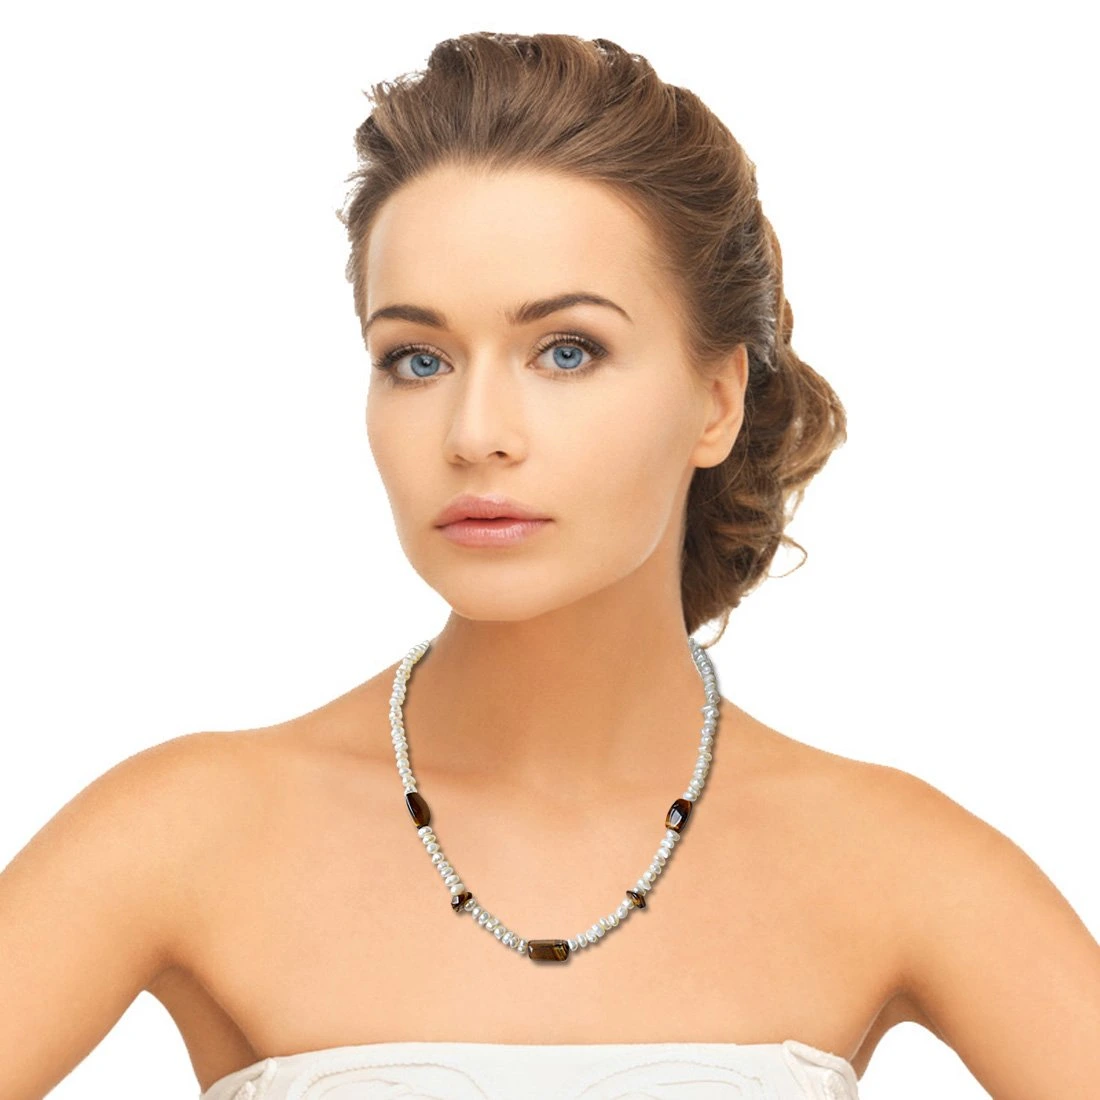 Single Line Tiger Eye Beads and Freshwater Pearl Necklace for Women (SN903)